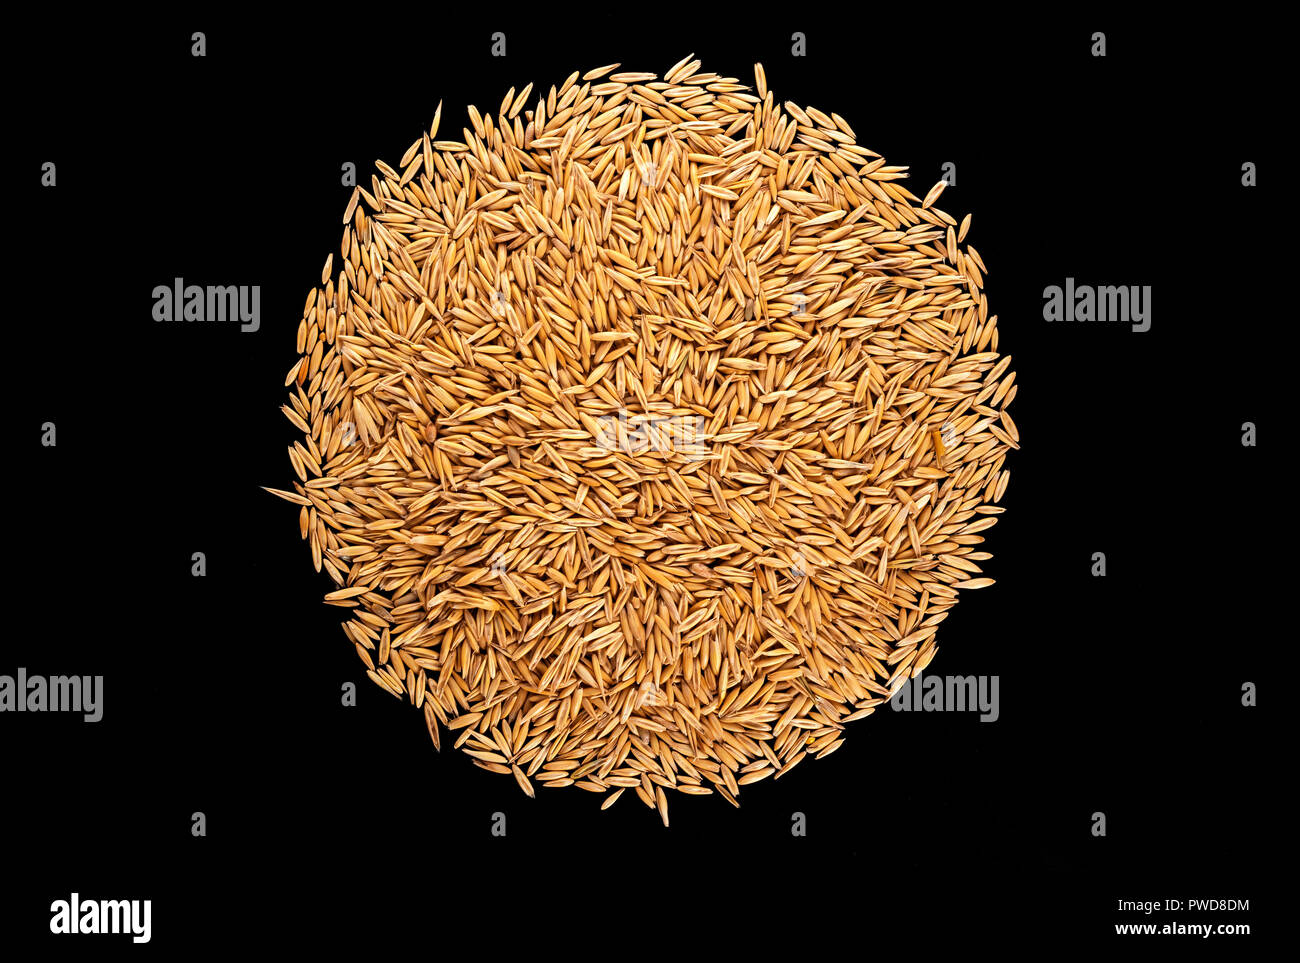 Pile of oat grains on black background, top view Stock Photo